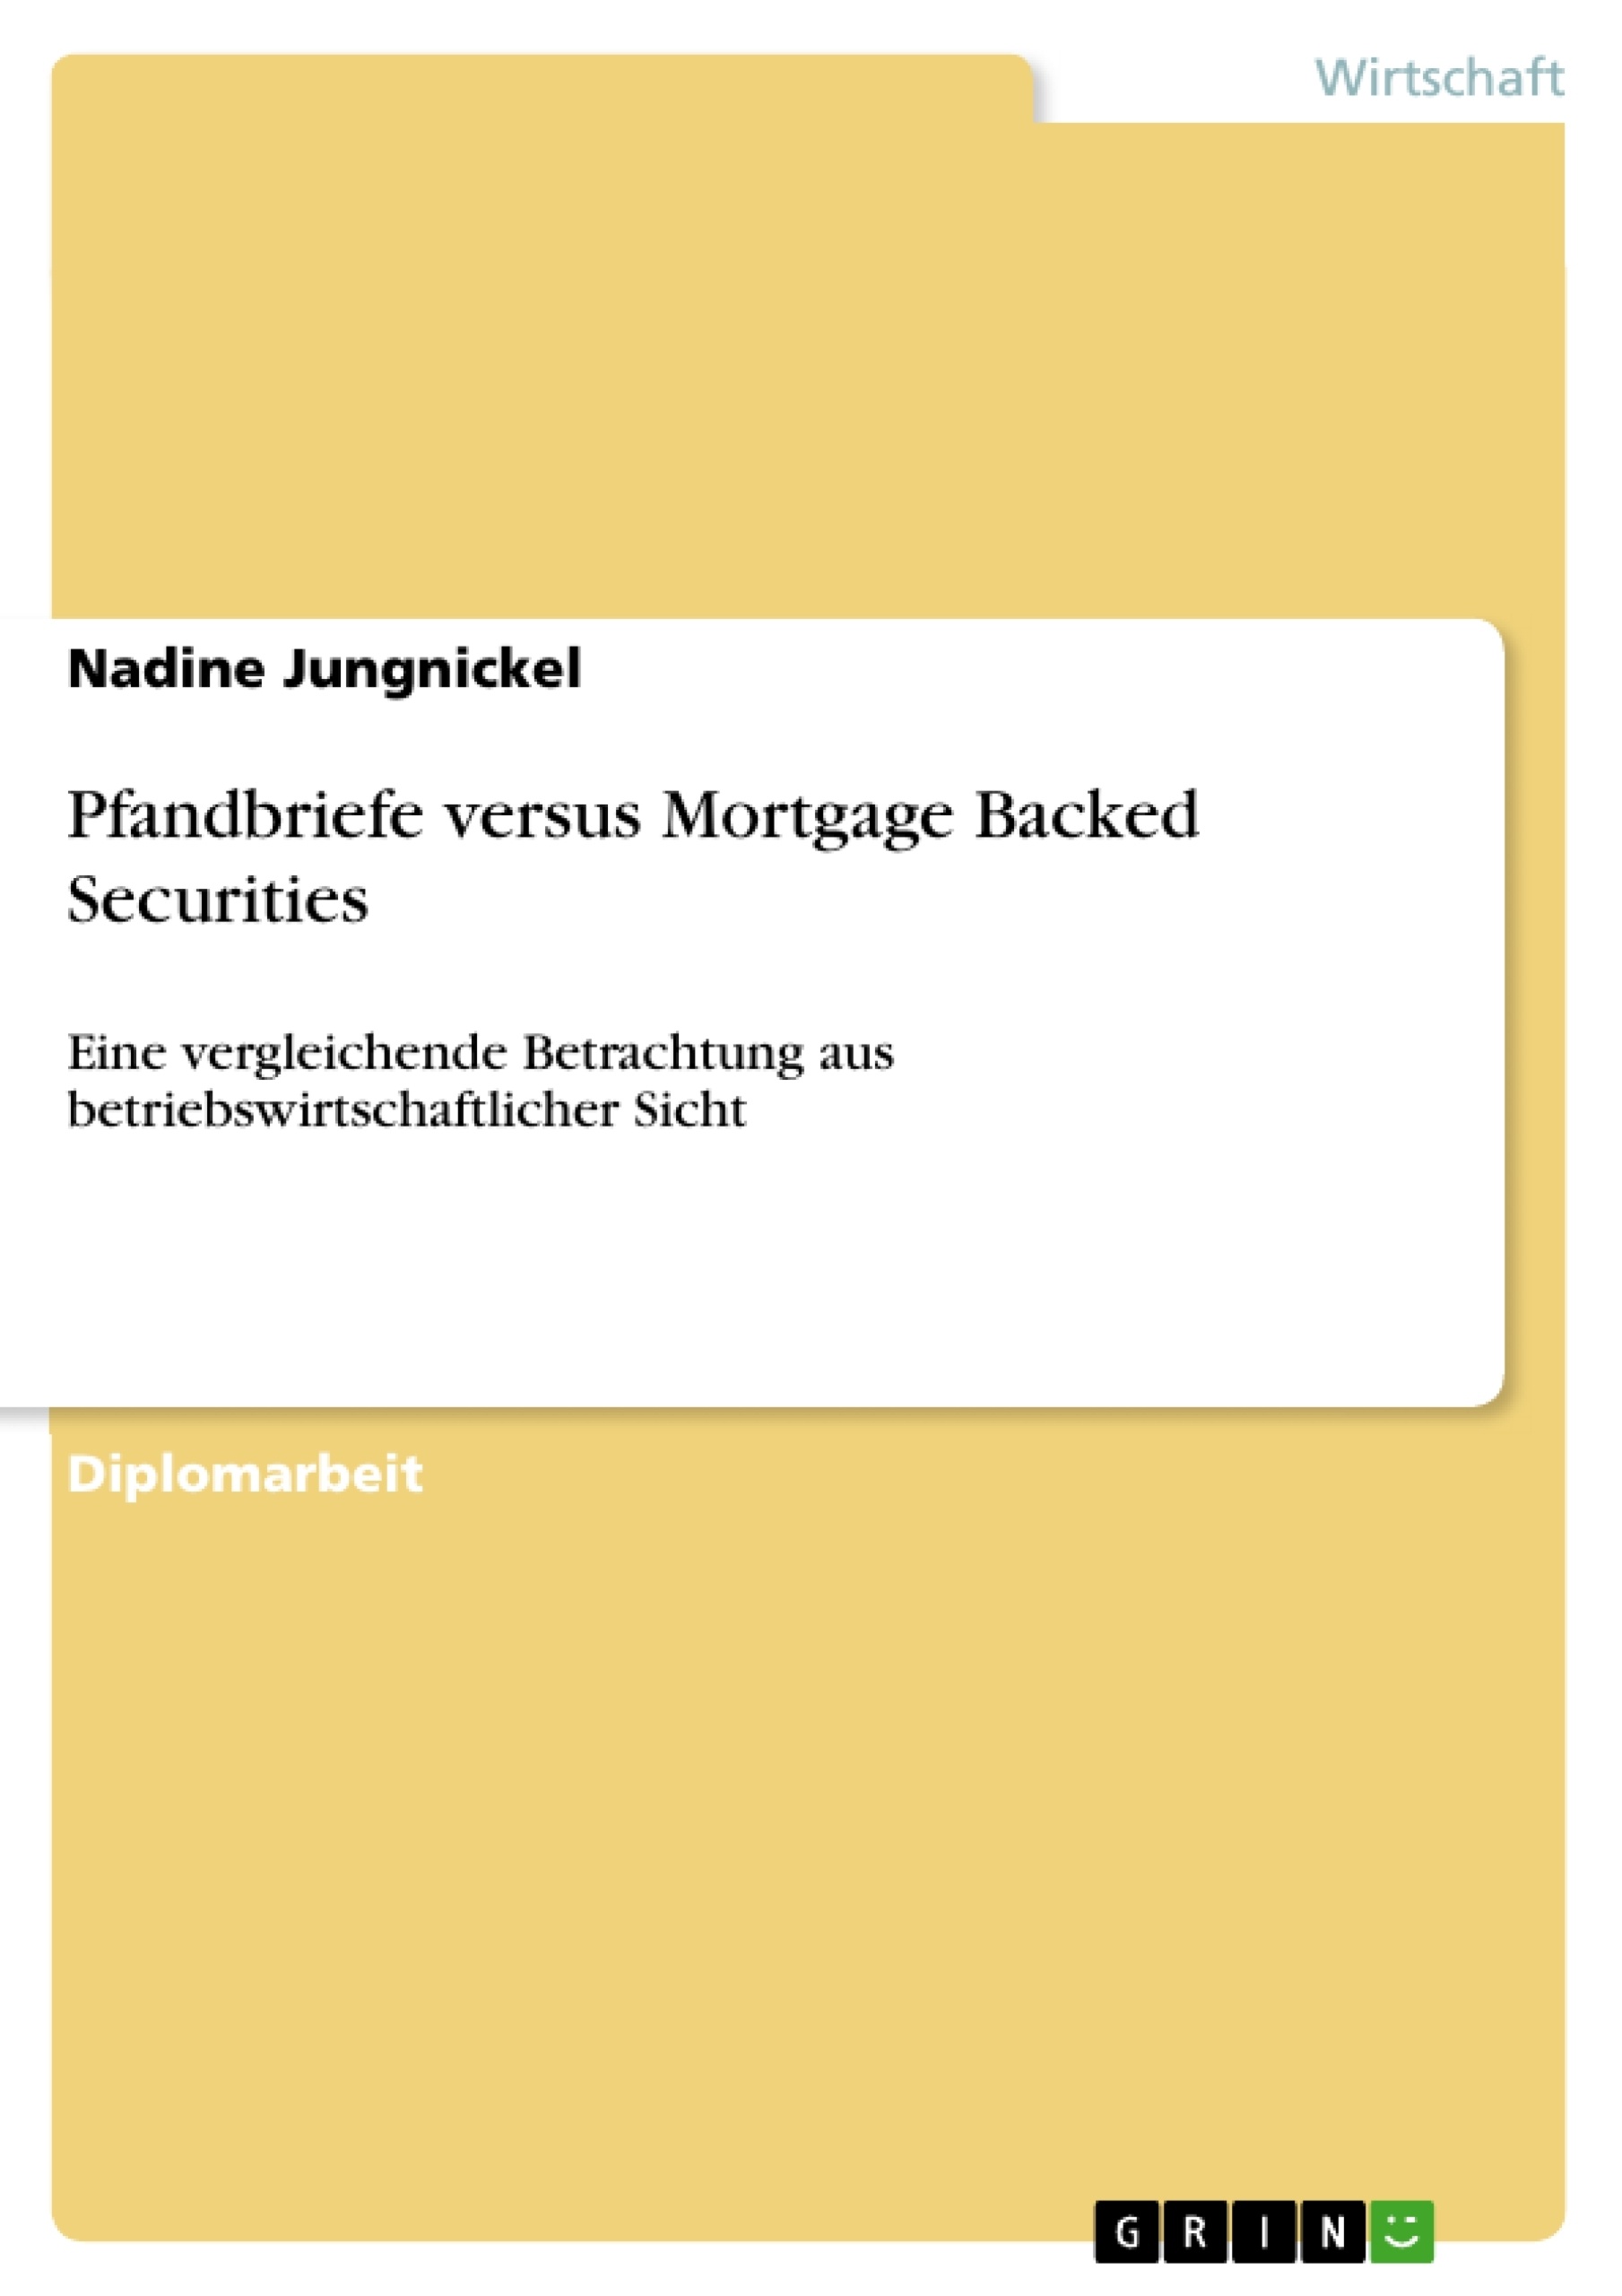 Titre: Pfandbriefe versus Mortgage Backed Securities